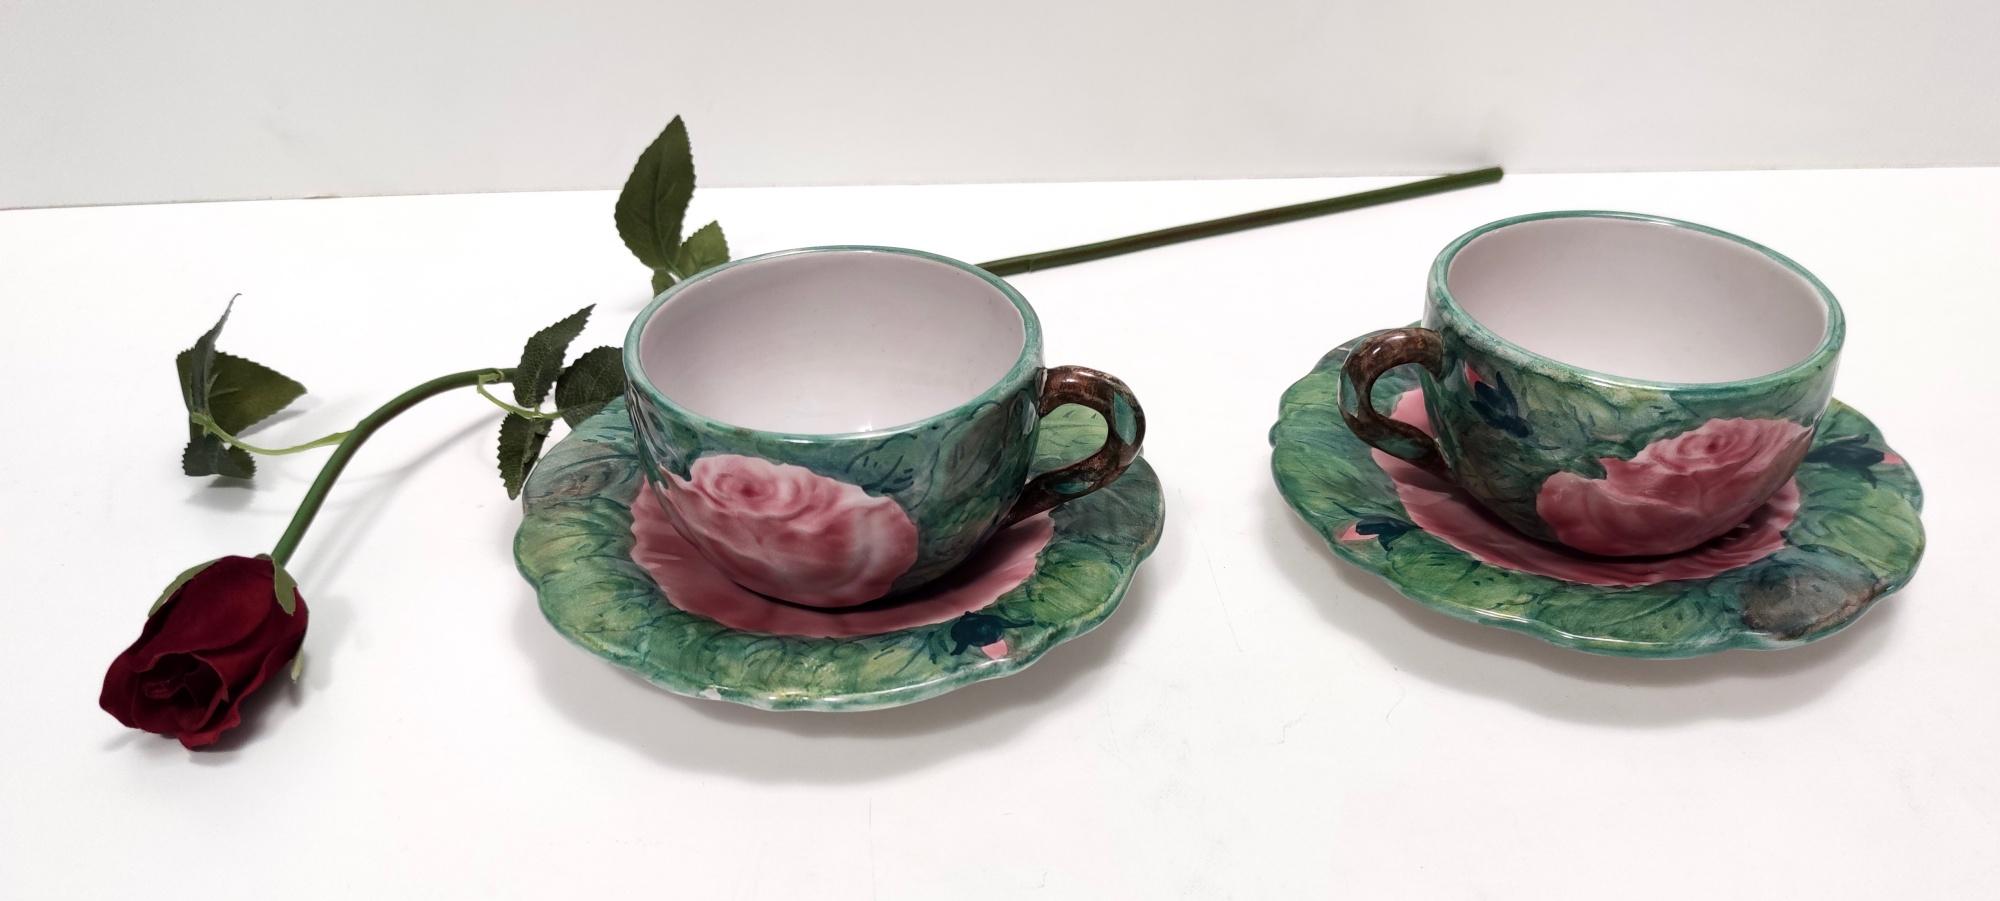 Pair of Vintage Earthenware Tea /Coffee Cups with Floral Motifs by Zaccagnini For Sale 6